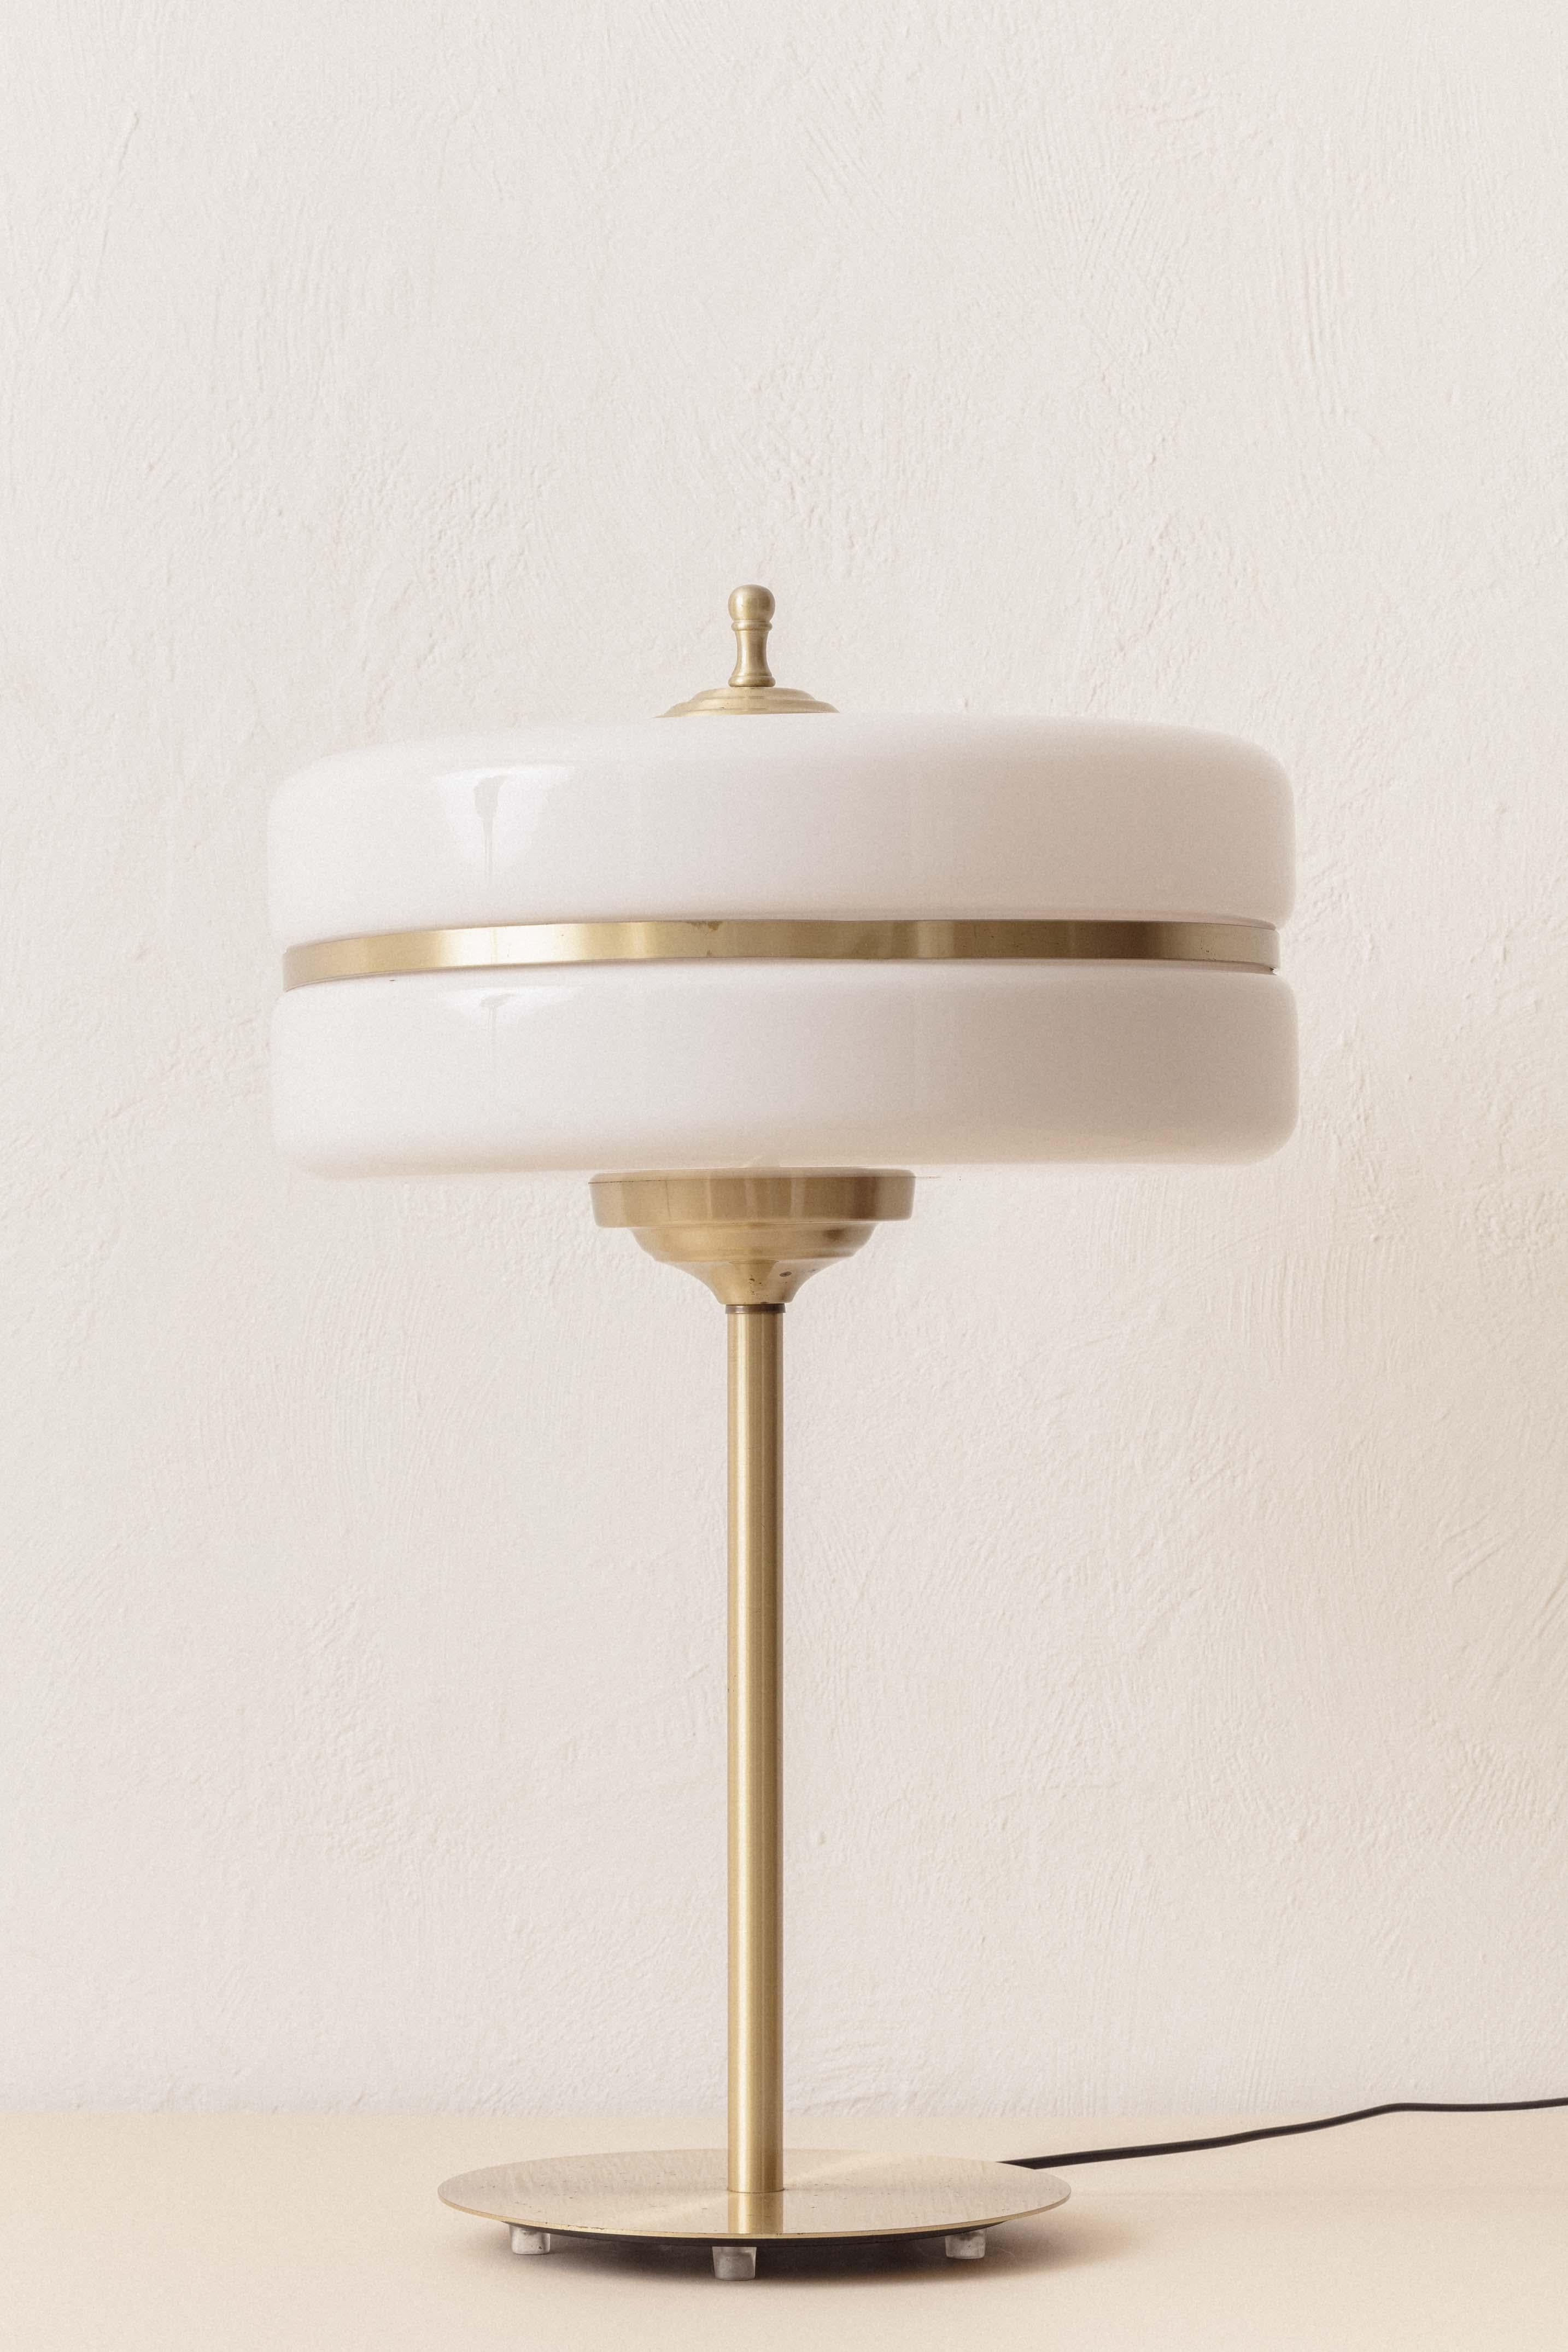 Mid-Century Modern Table Lamp in Iron, Brass and Opaline Glass, Unknown Designer, 1970, Brazil For Sale